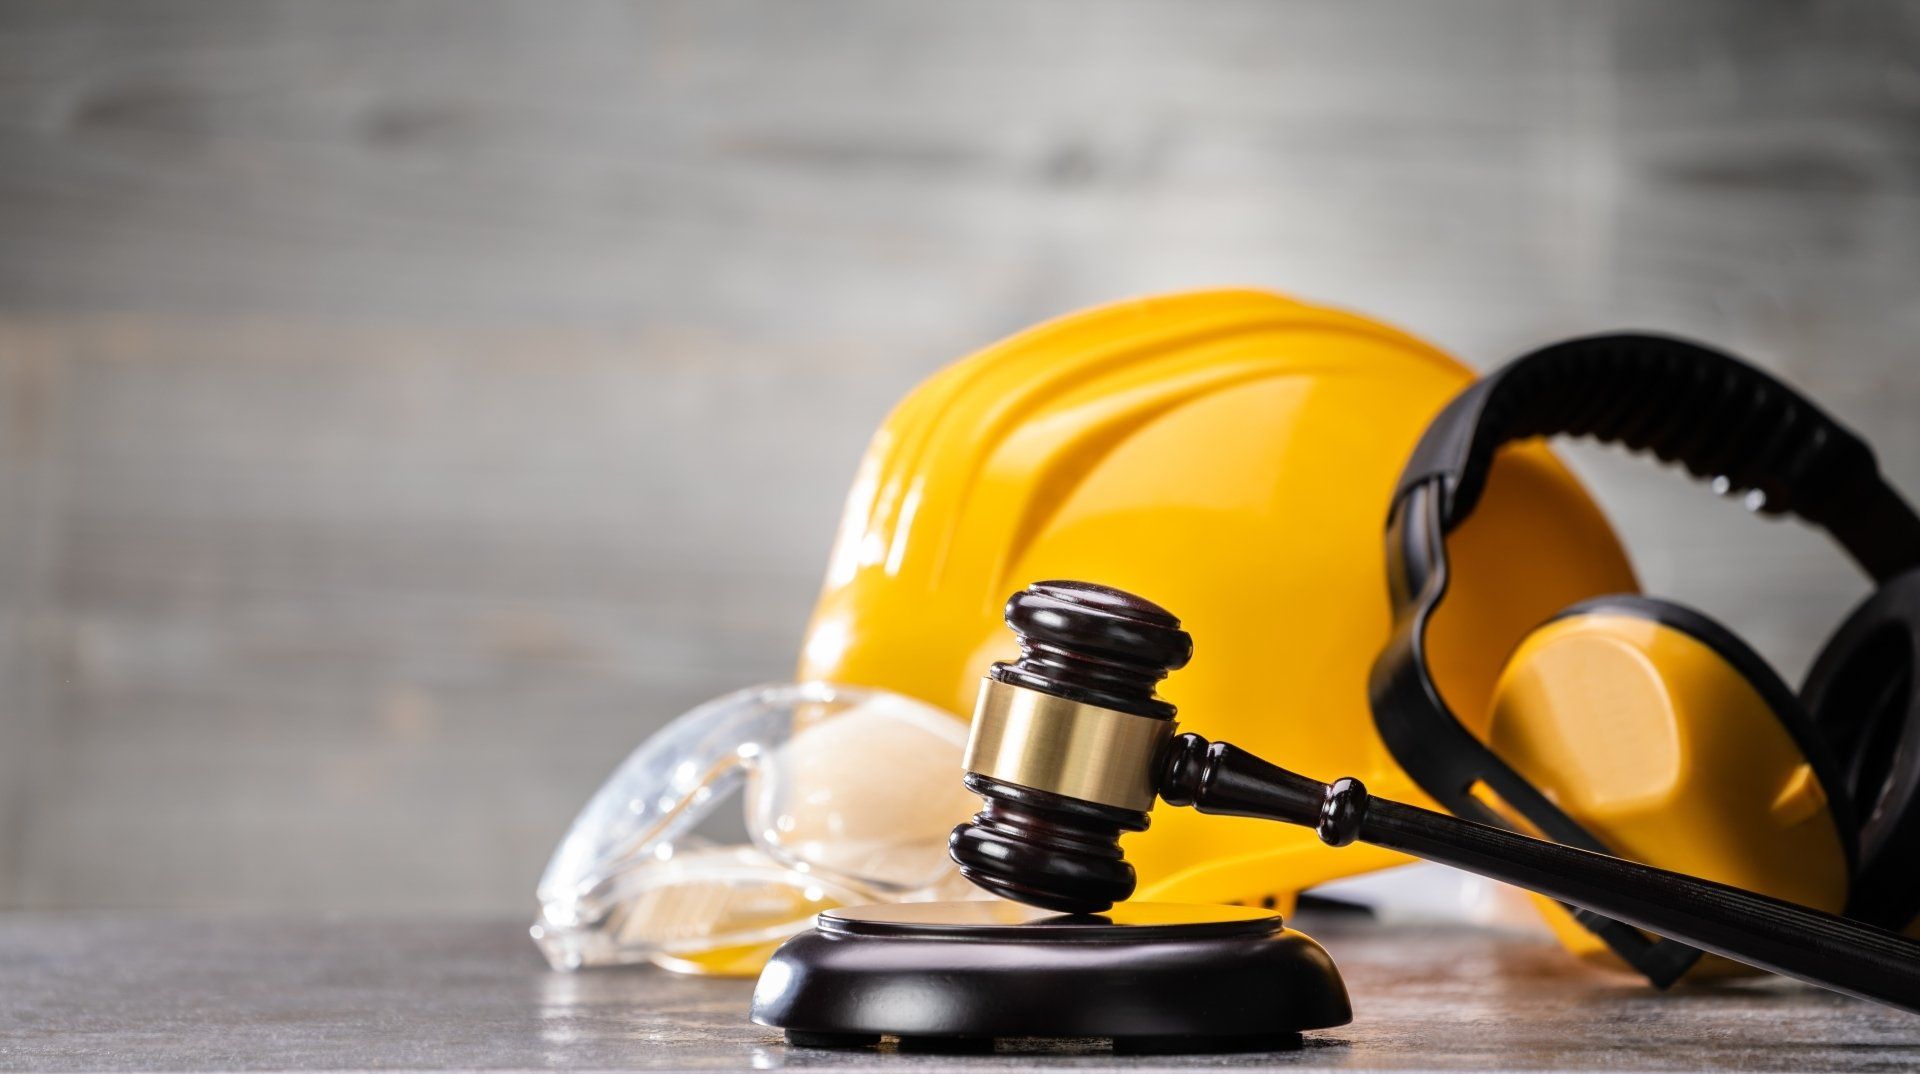 Construction Law Legal Litigation And Gavel Or Mallet